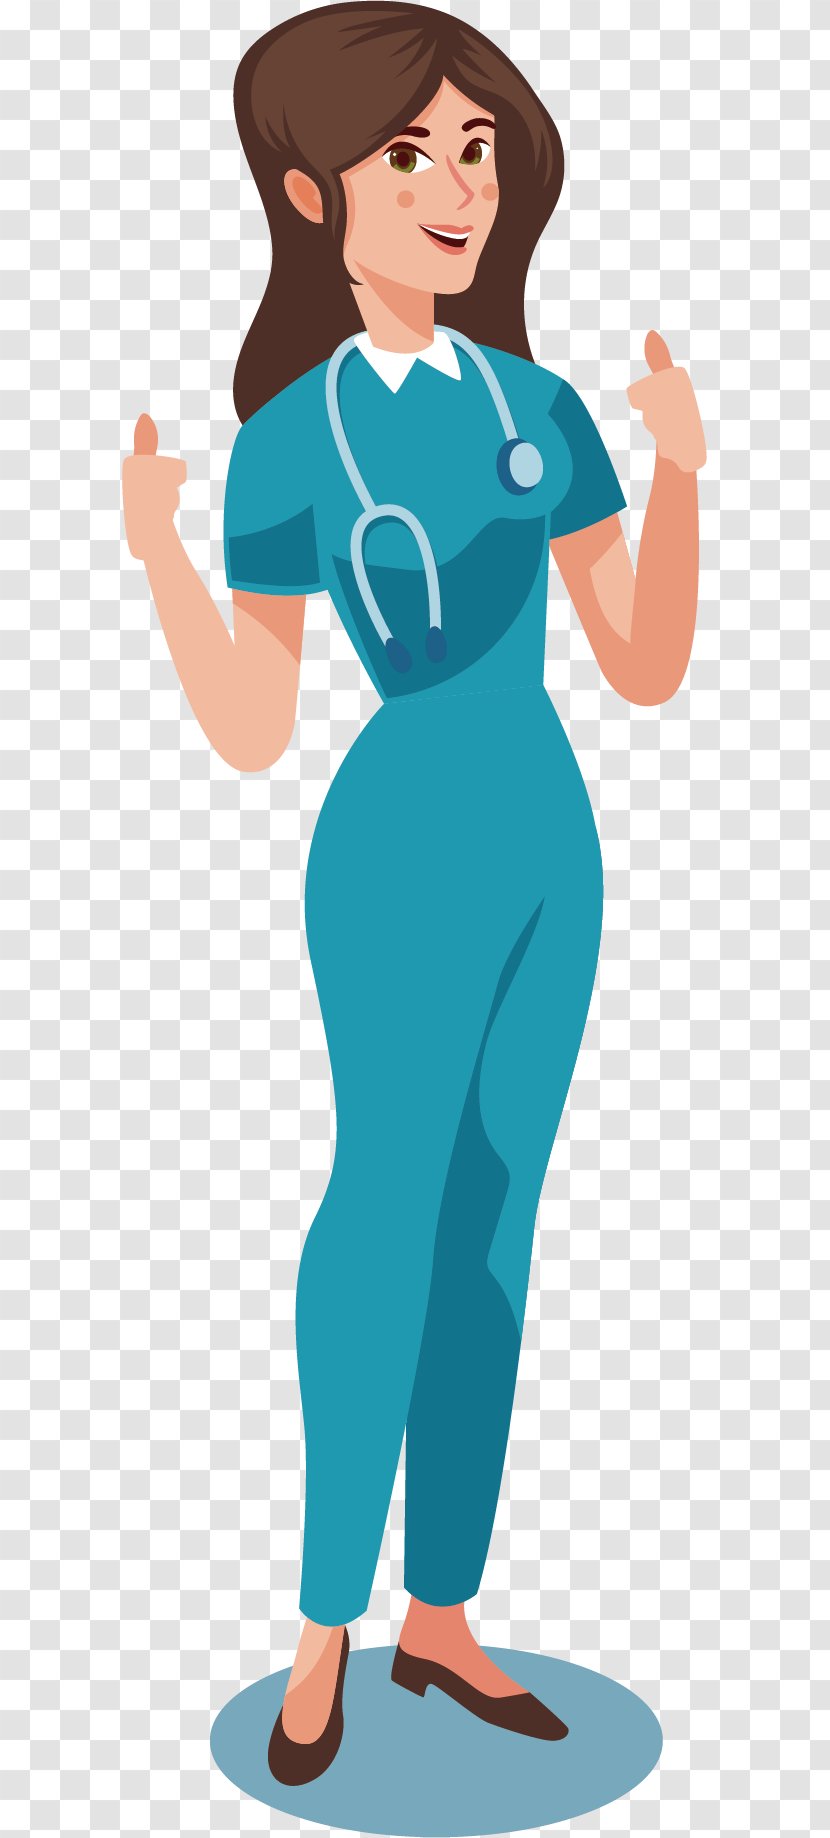 Physician Smile Computer File - Frame - Smiling Woman Doctor Transparent PNG